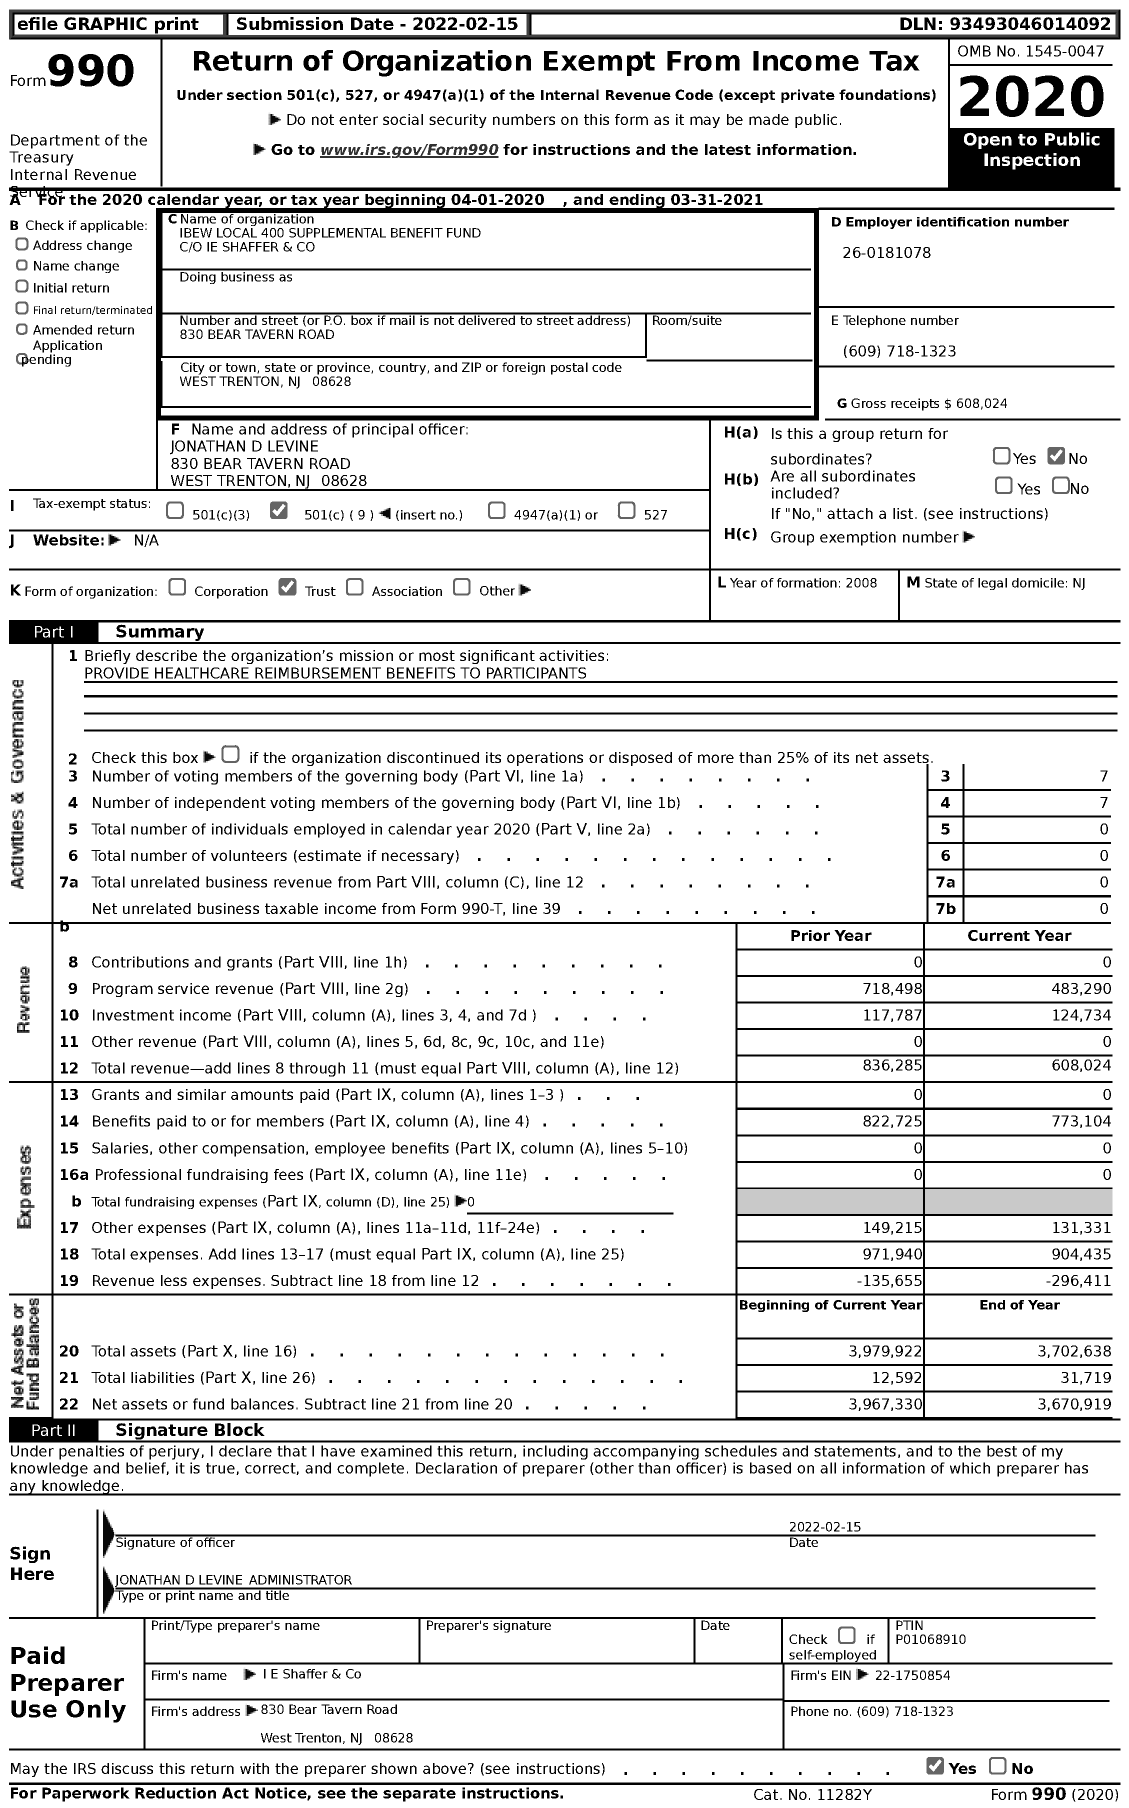 Image of first page of 2020 Form 990 for IBEW Local 400 Supplemental Benefit Fund